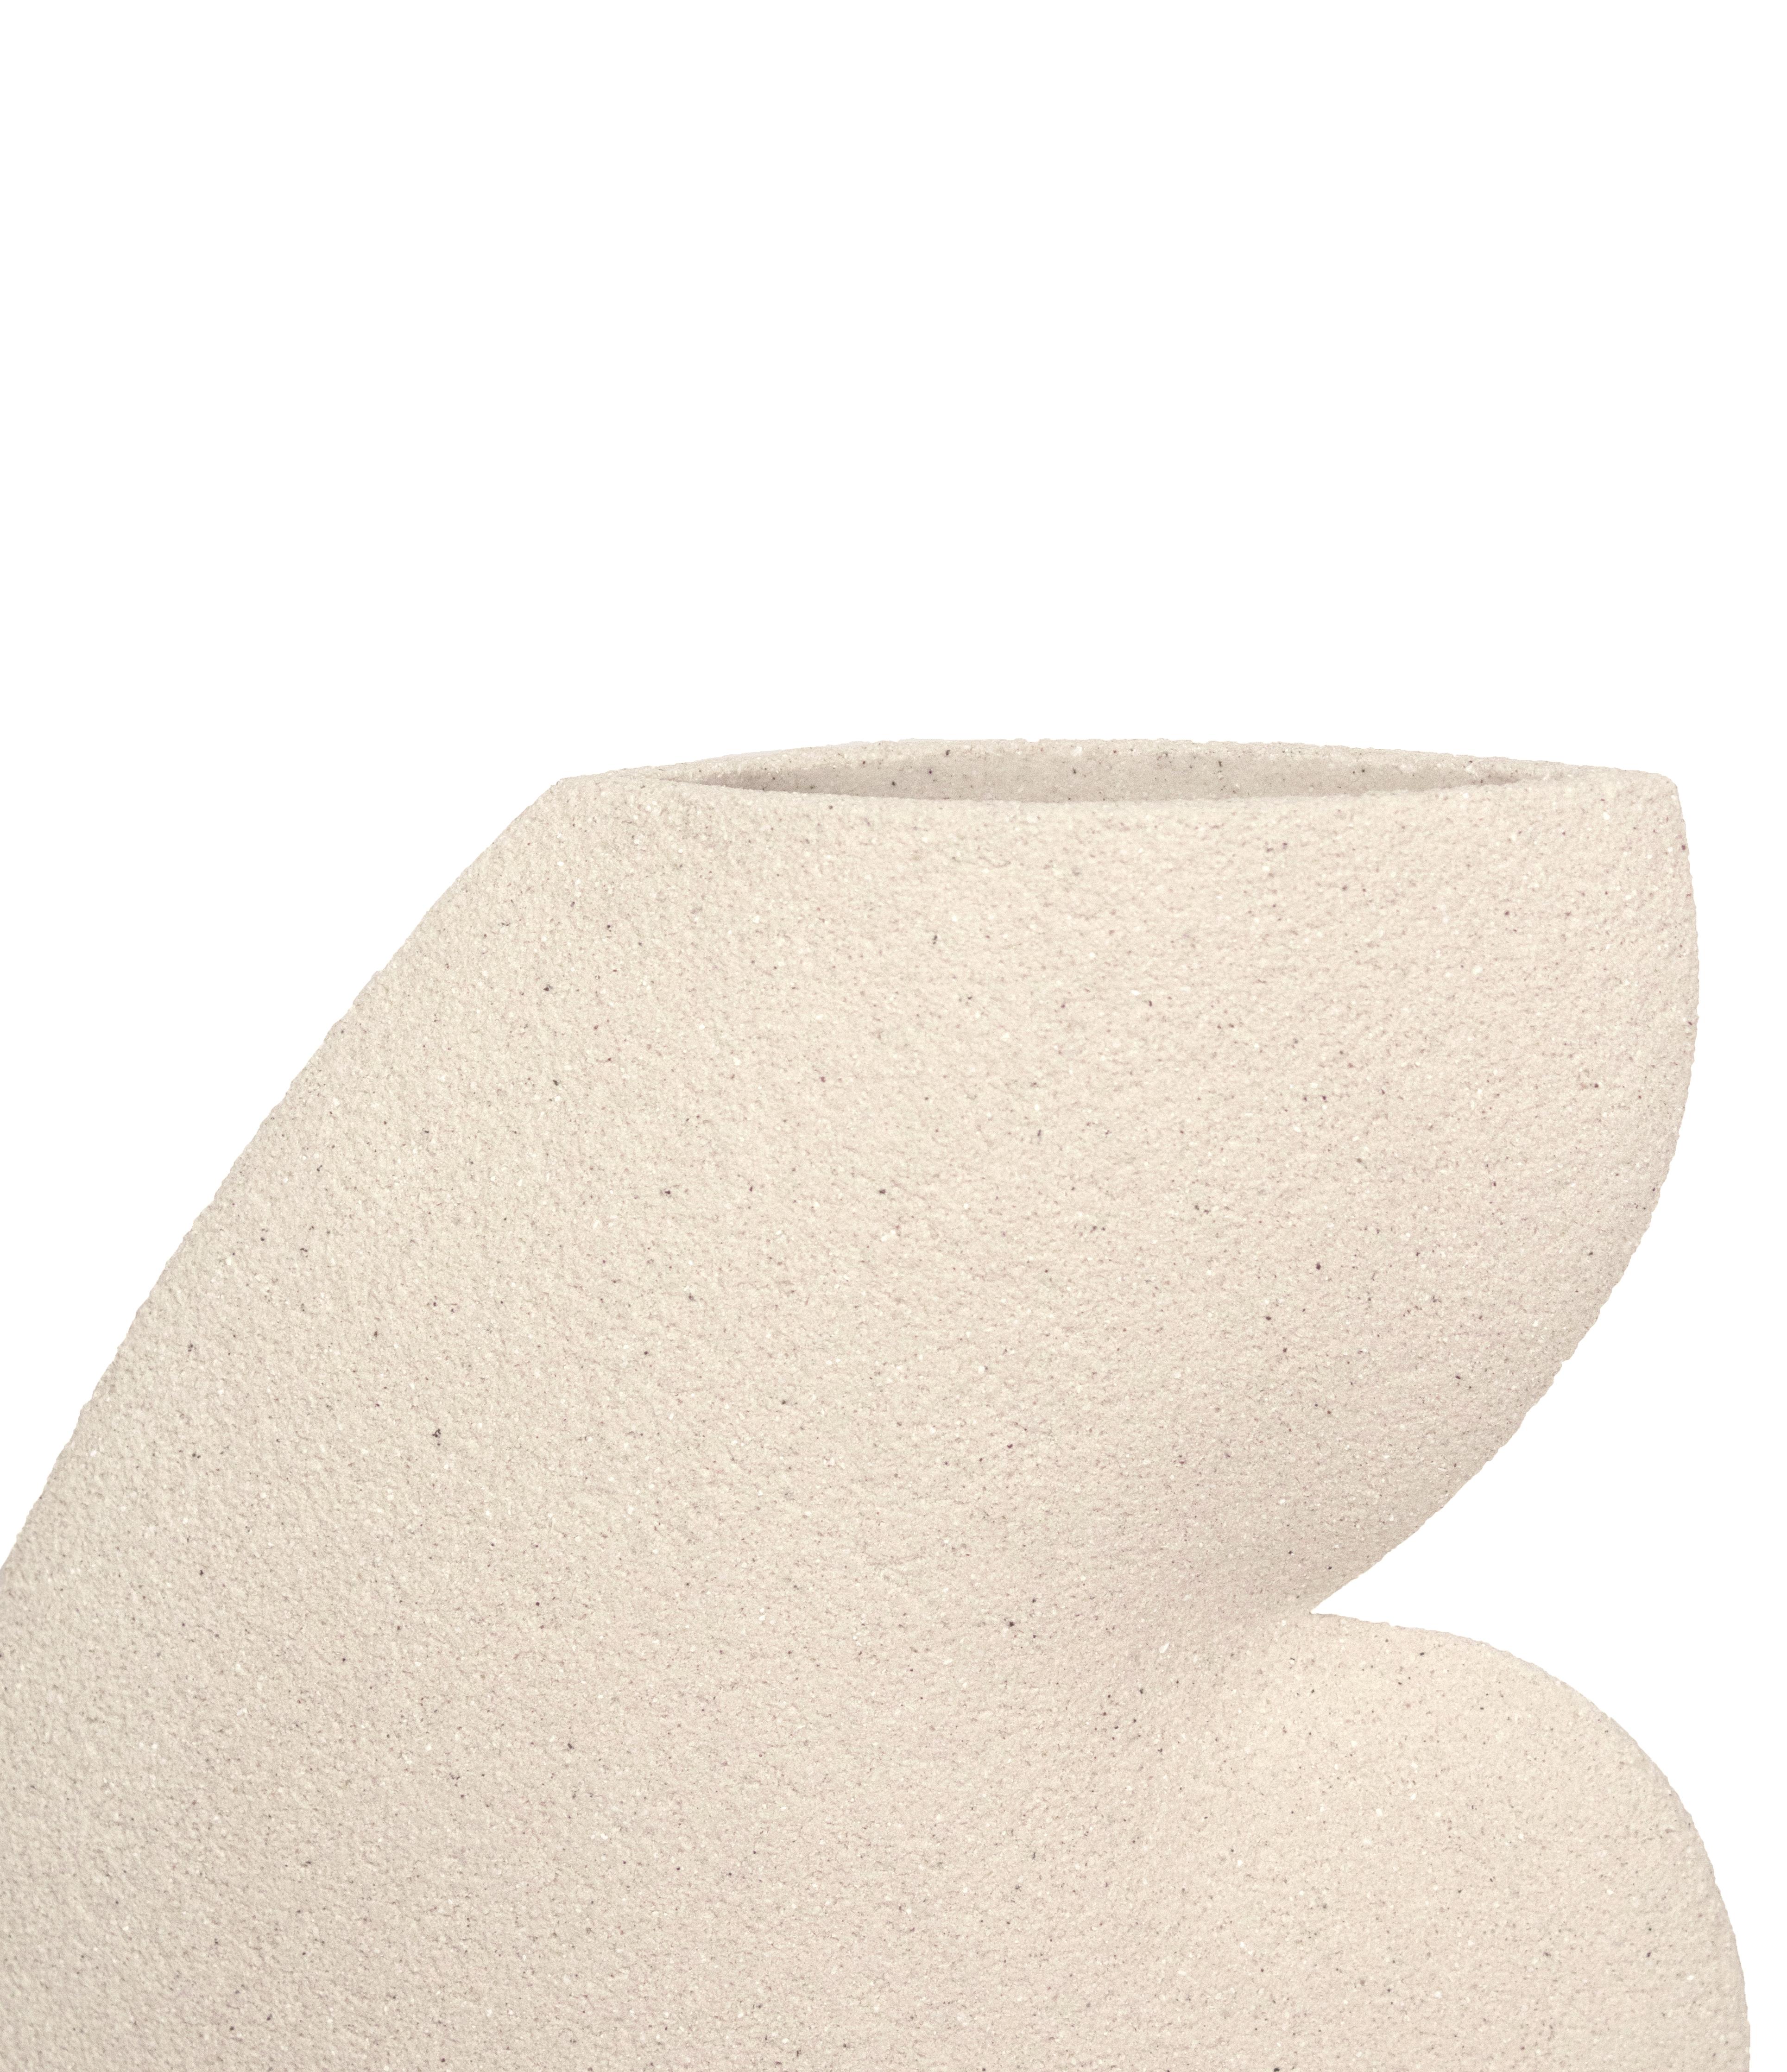 Minimalist 21st Century Ellipse N°3 Vase in White Ceramic, Hand-Crafted in France For Sale